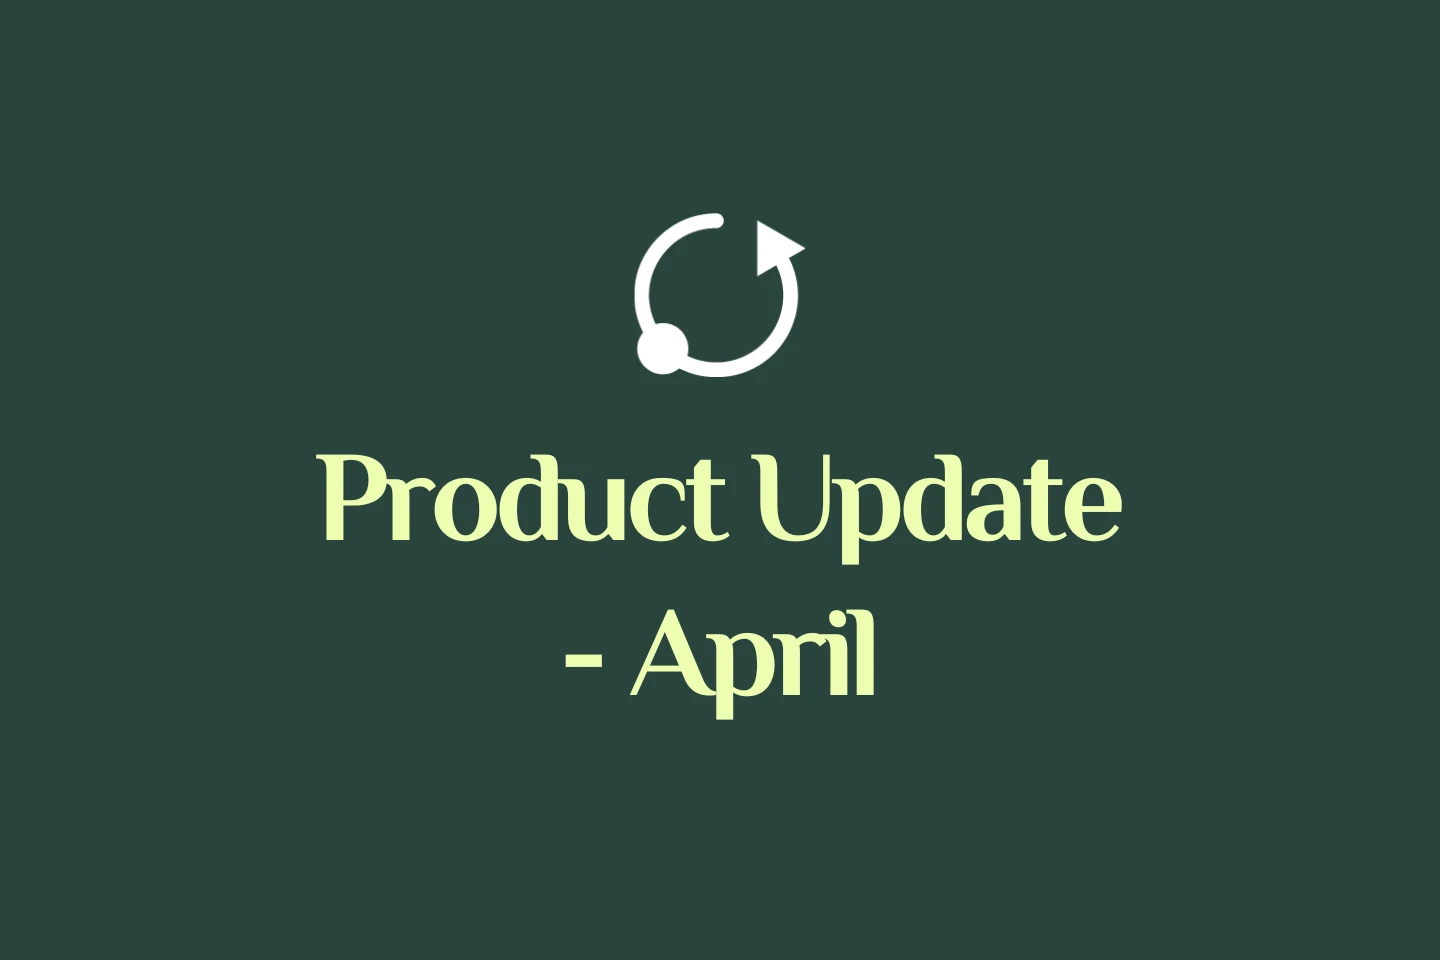 Product Update - April